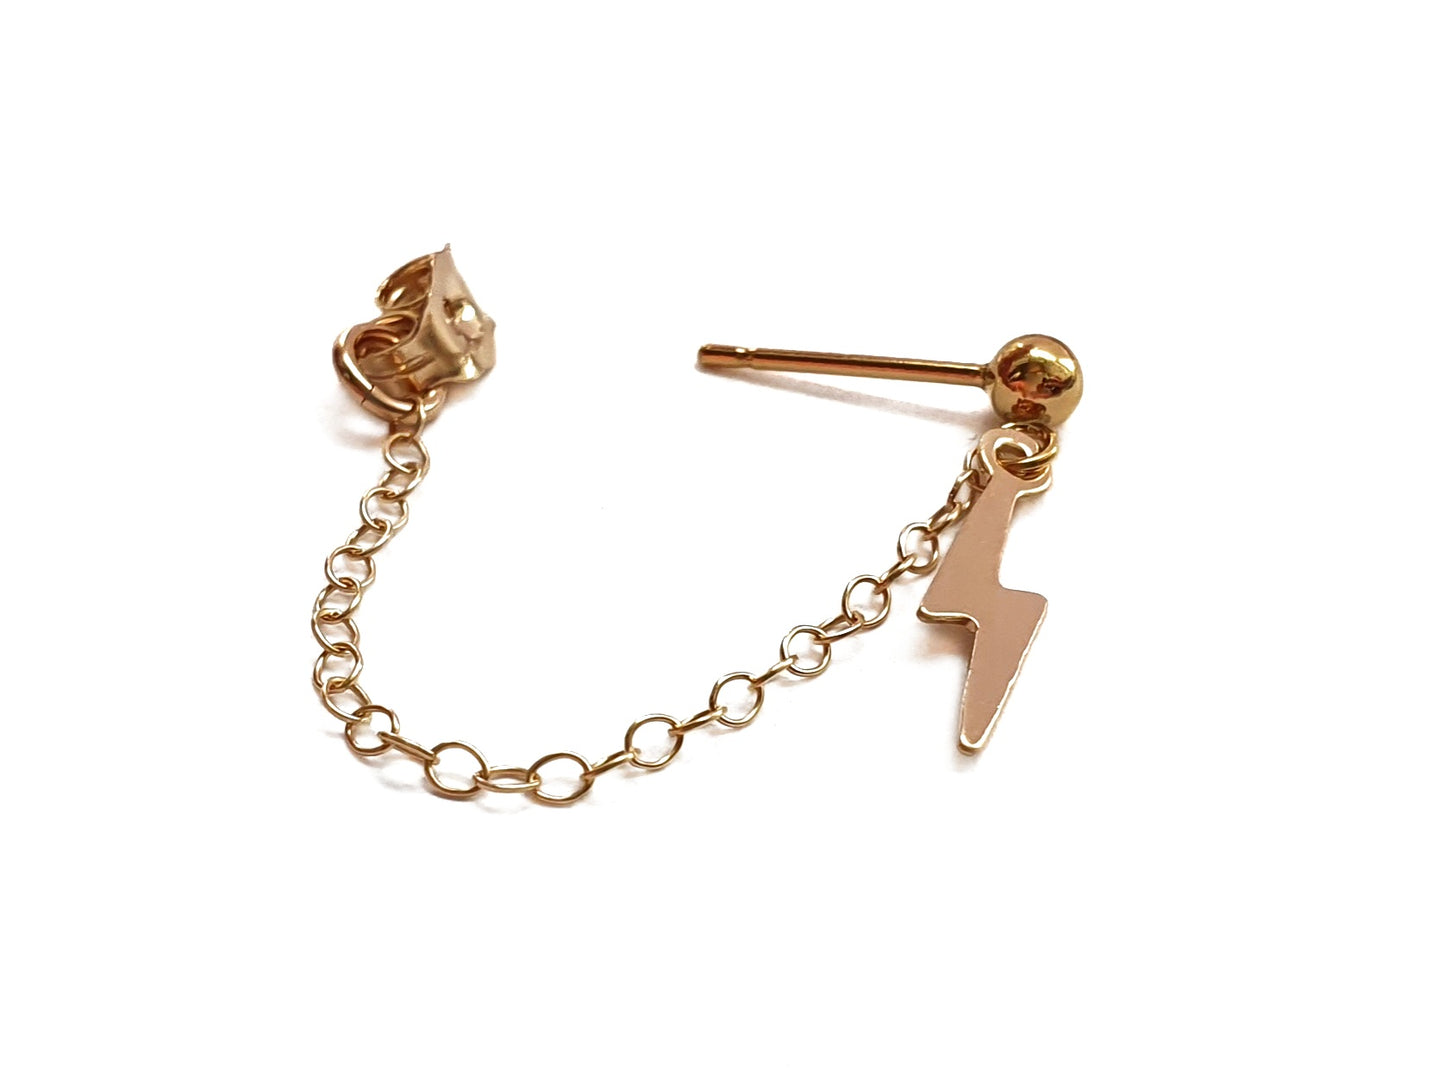 Lightning Bolt Charm and Chain Helix Cartilage Earring. 14k Gold Filled